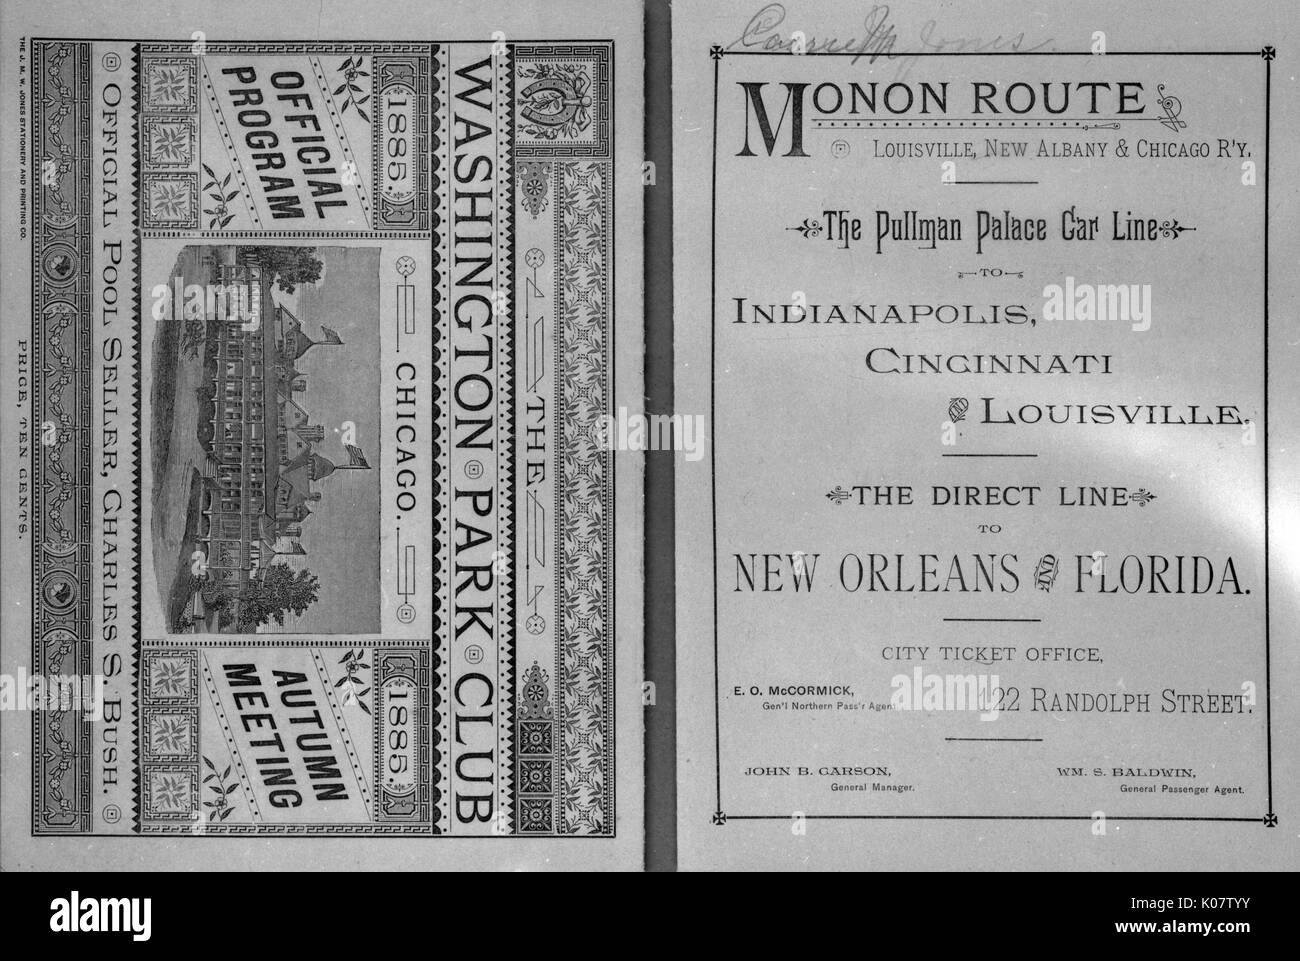 Leaflet cover design with horseracing scene, Washington Park Club, Chicago, Official Program, Autumn Meeting, 1885.  With a facing page advertising the Pullman Palace Car Route, the Monon Line of the Louisville, New Albany and Chicago Railway.      Date: 1885 Stock Photo